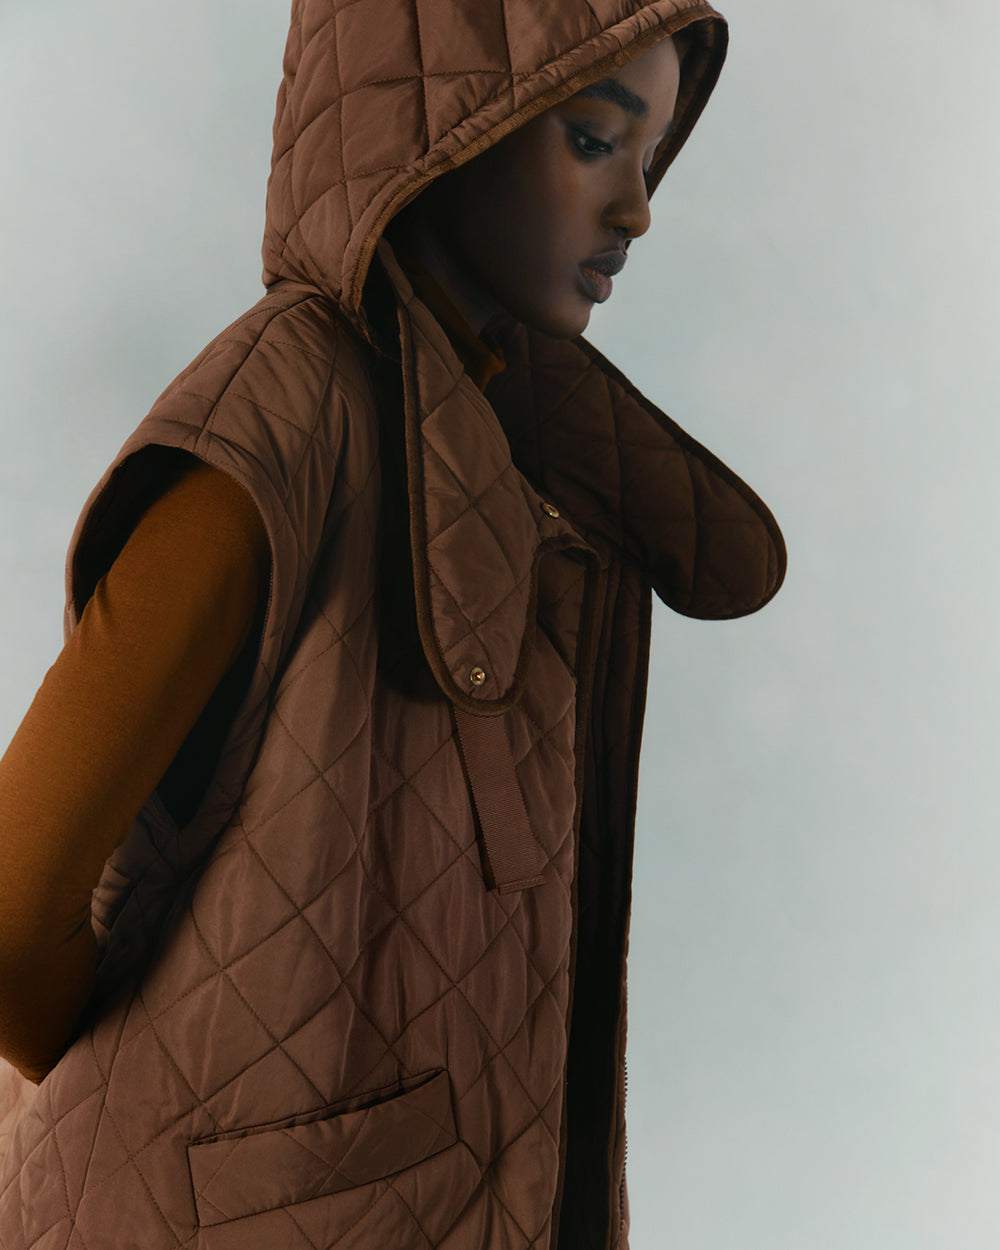 Person wearing a hooded vest looking downward.